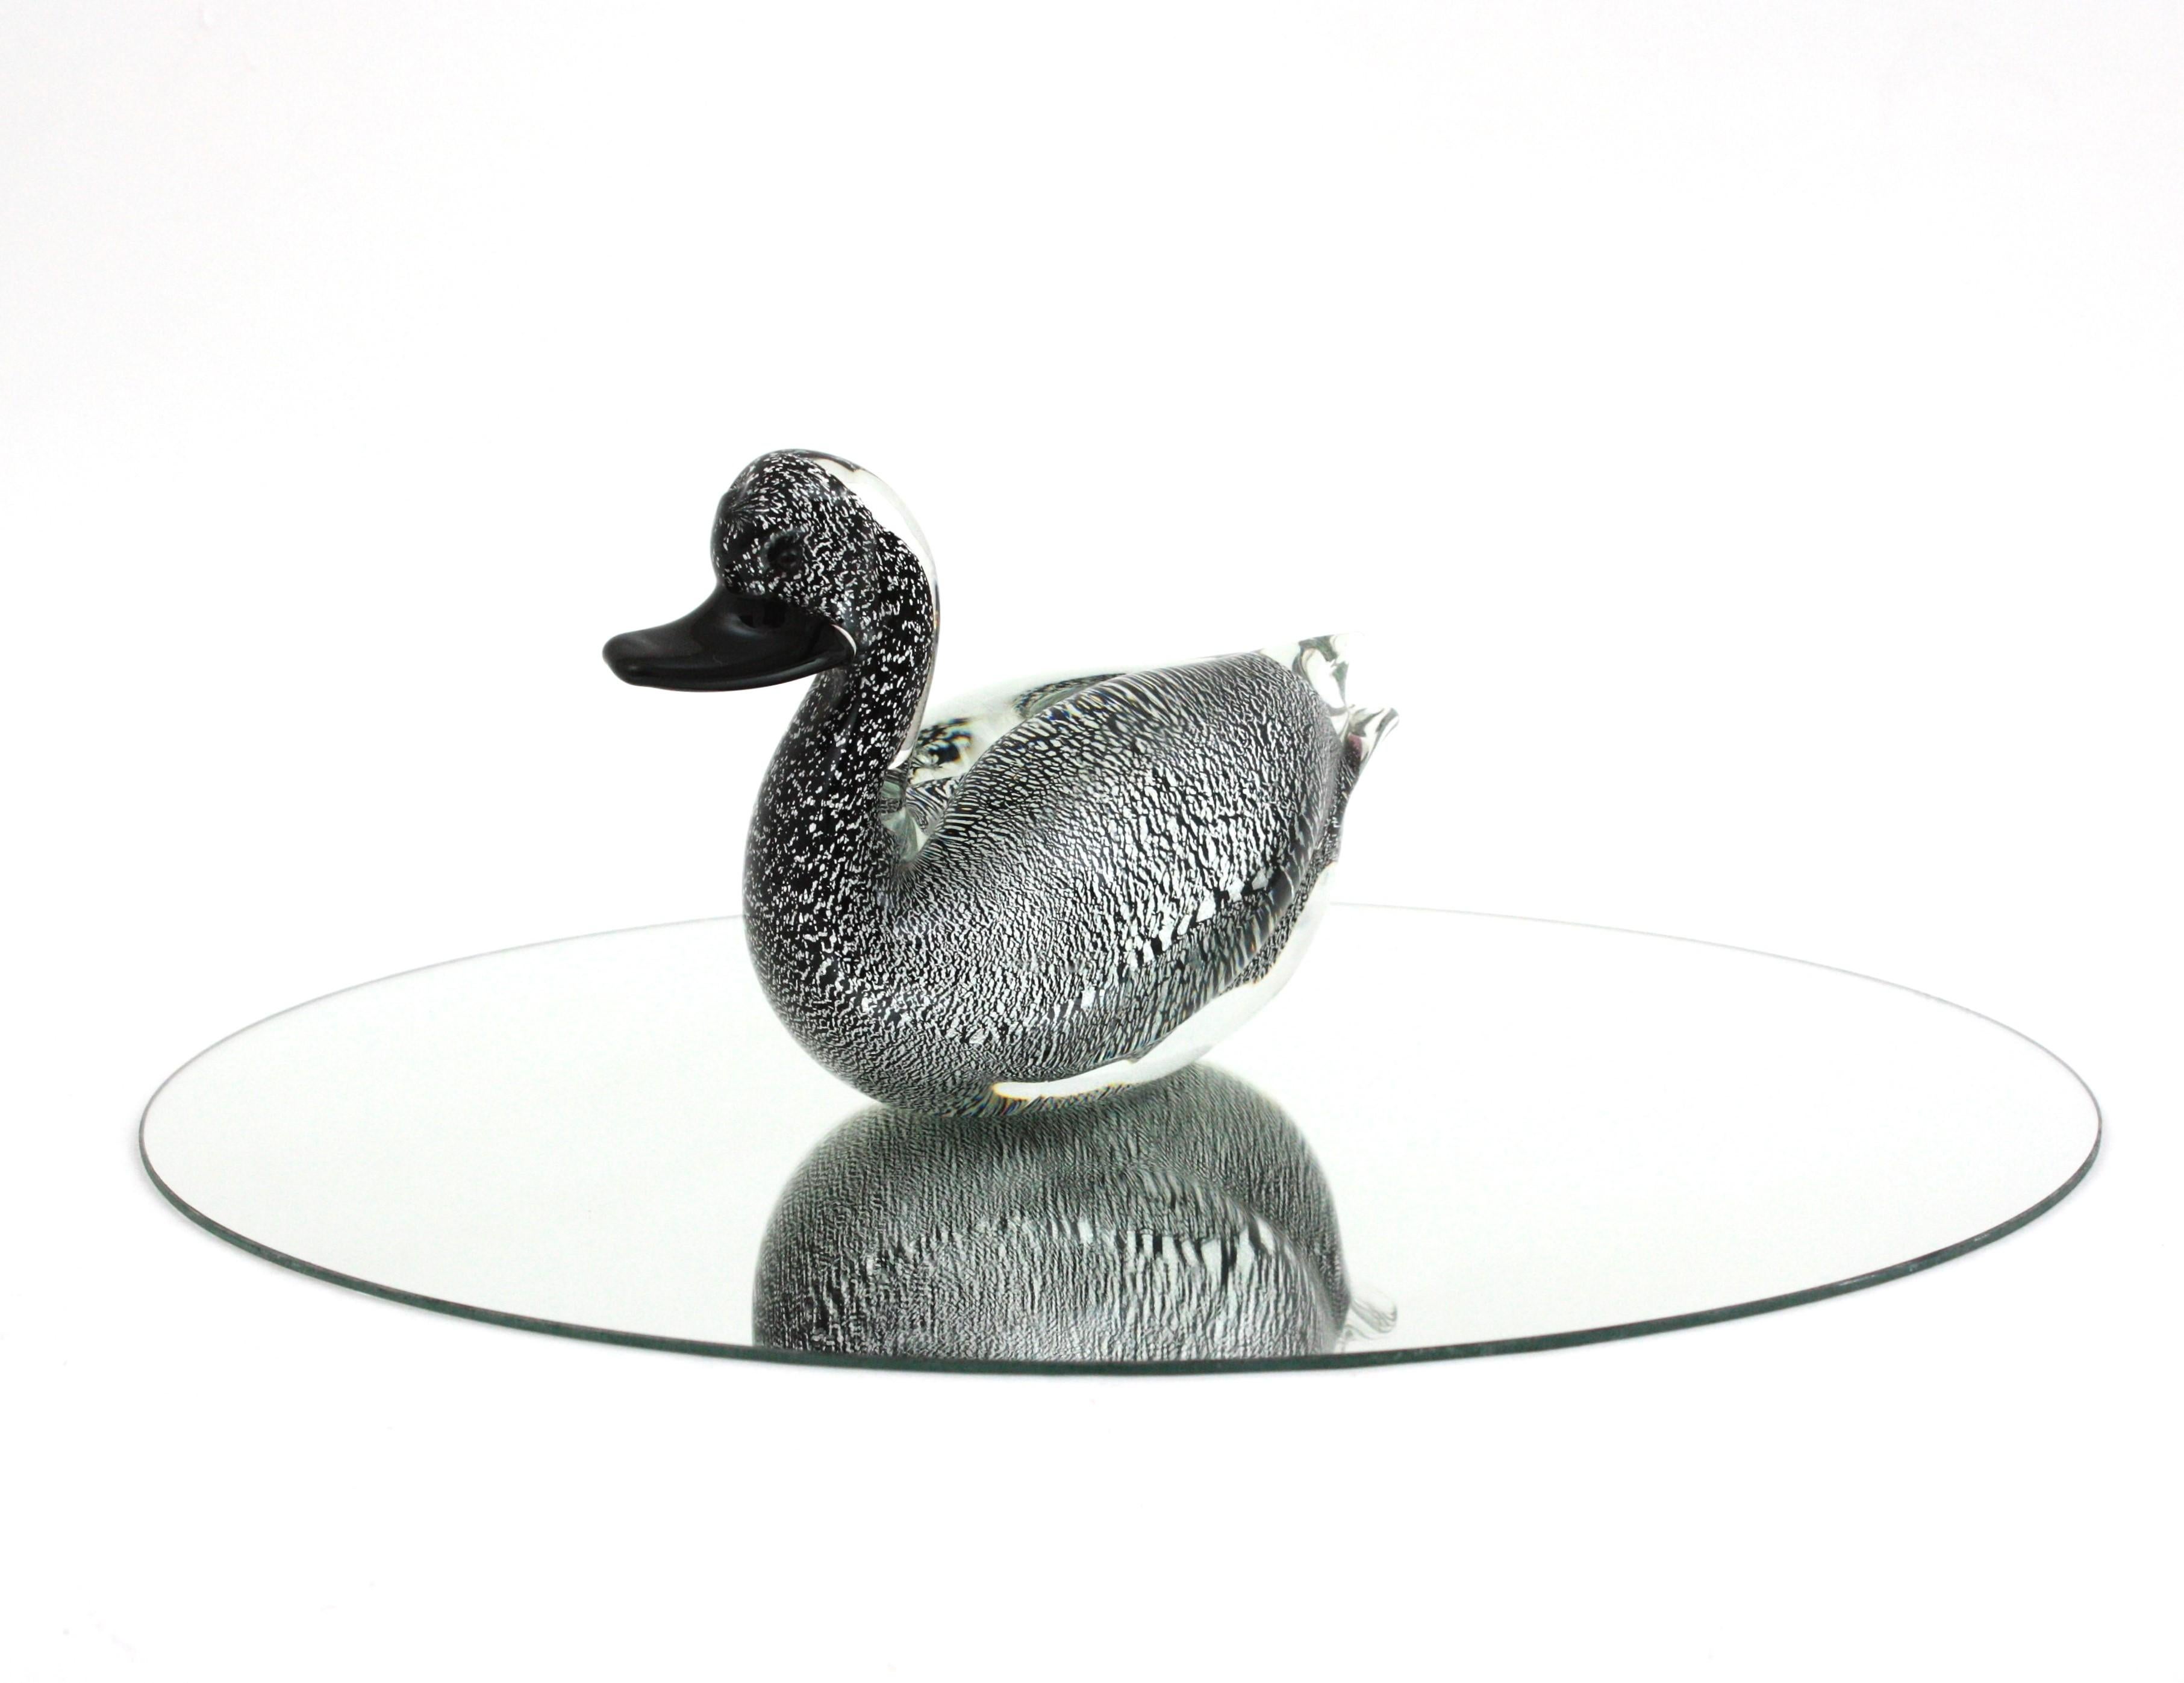  Murano Black Clear Duck Sculpture Art Glass Paperweight with Silver Flecks For Sale 2